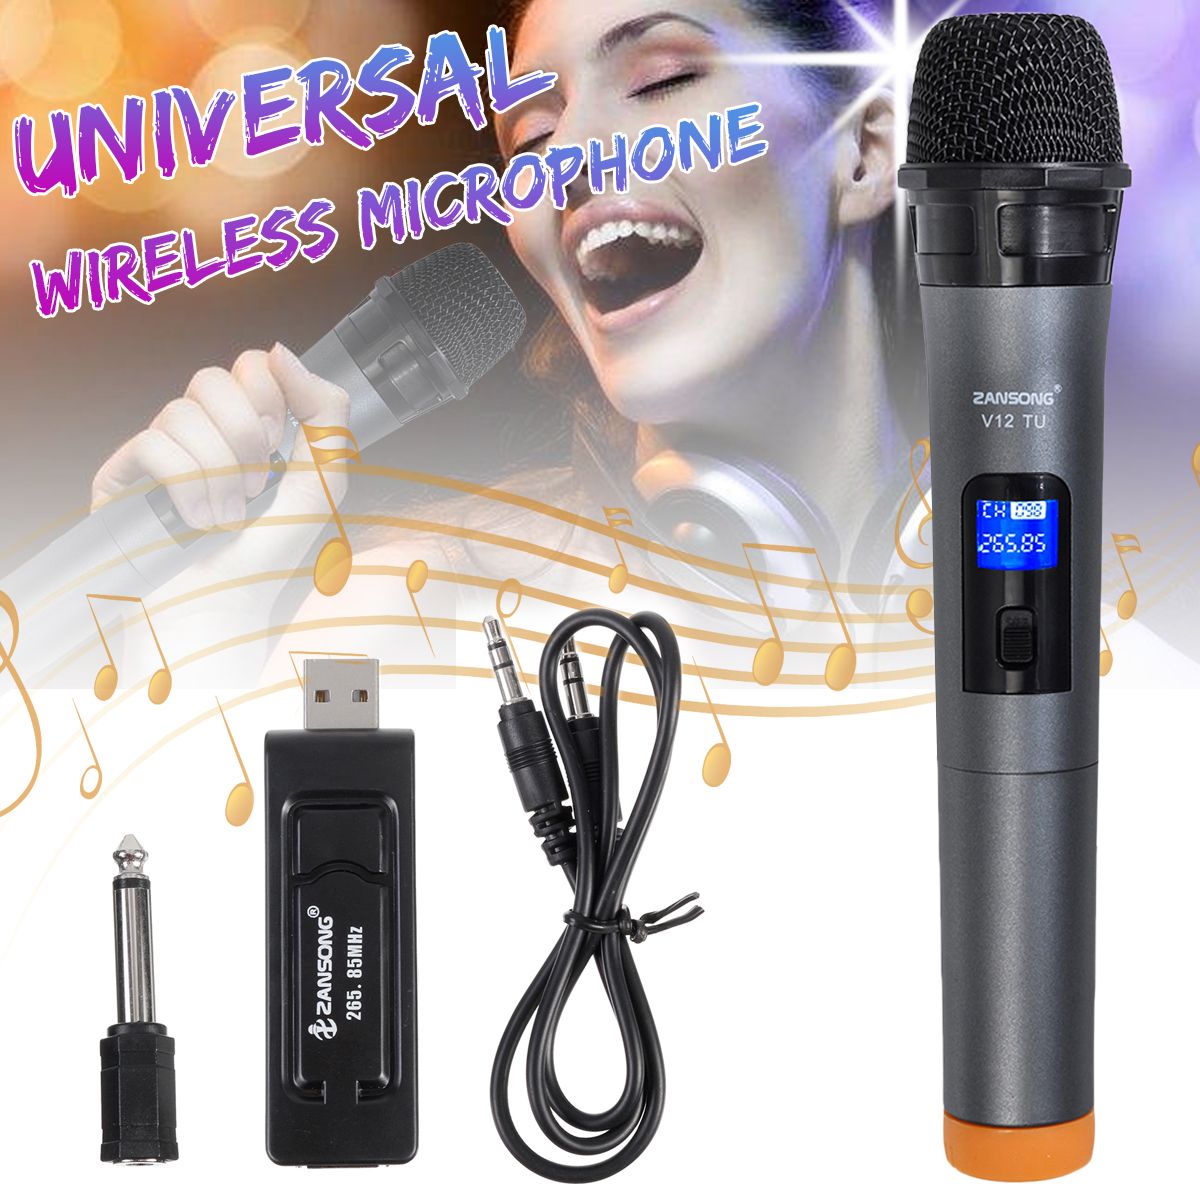 Professional-UHF-Wireless-Microphone-Handheld-Mic-System-Karaoke-With-Receiver-and-Display-Screen-1594315